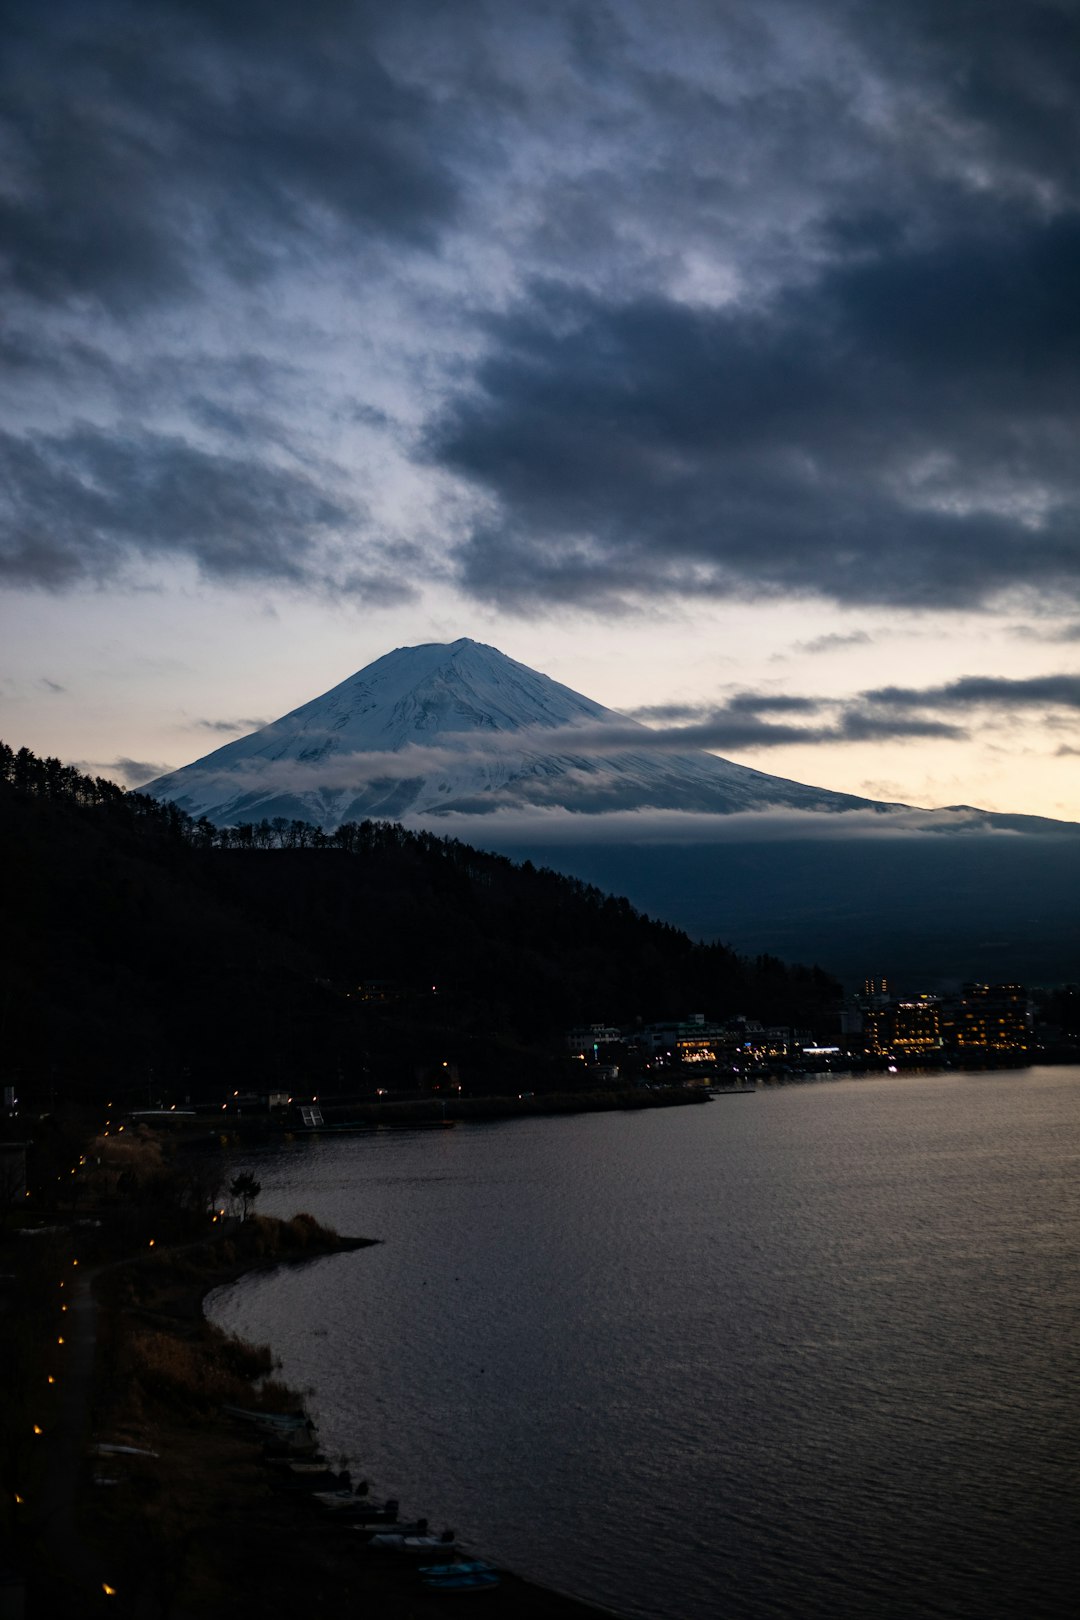 Travel Tips and Stories of Fuji in Japan